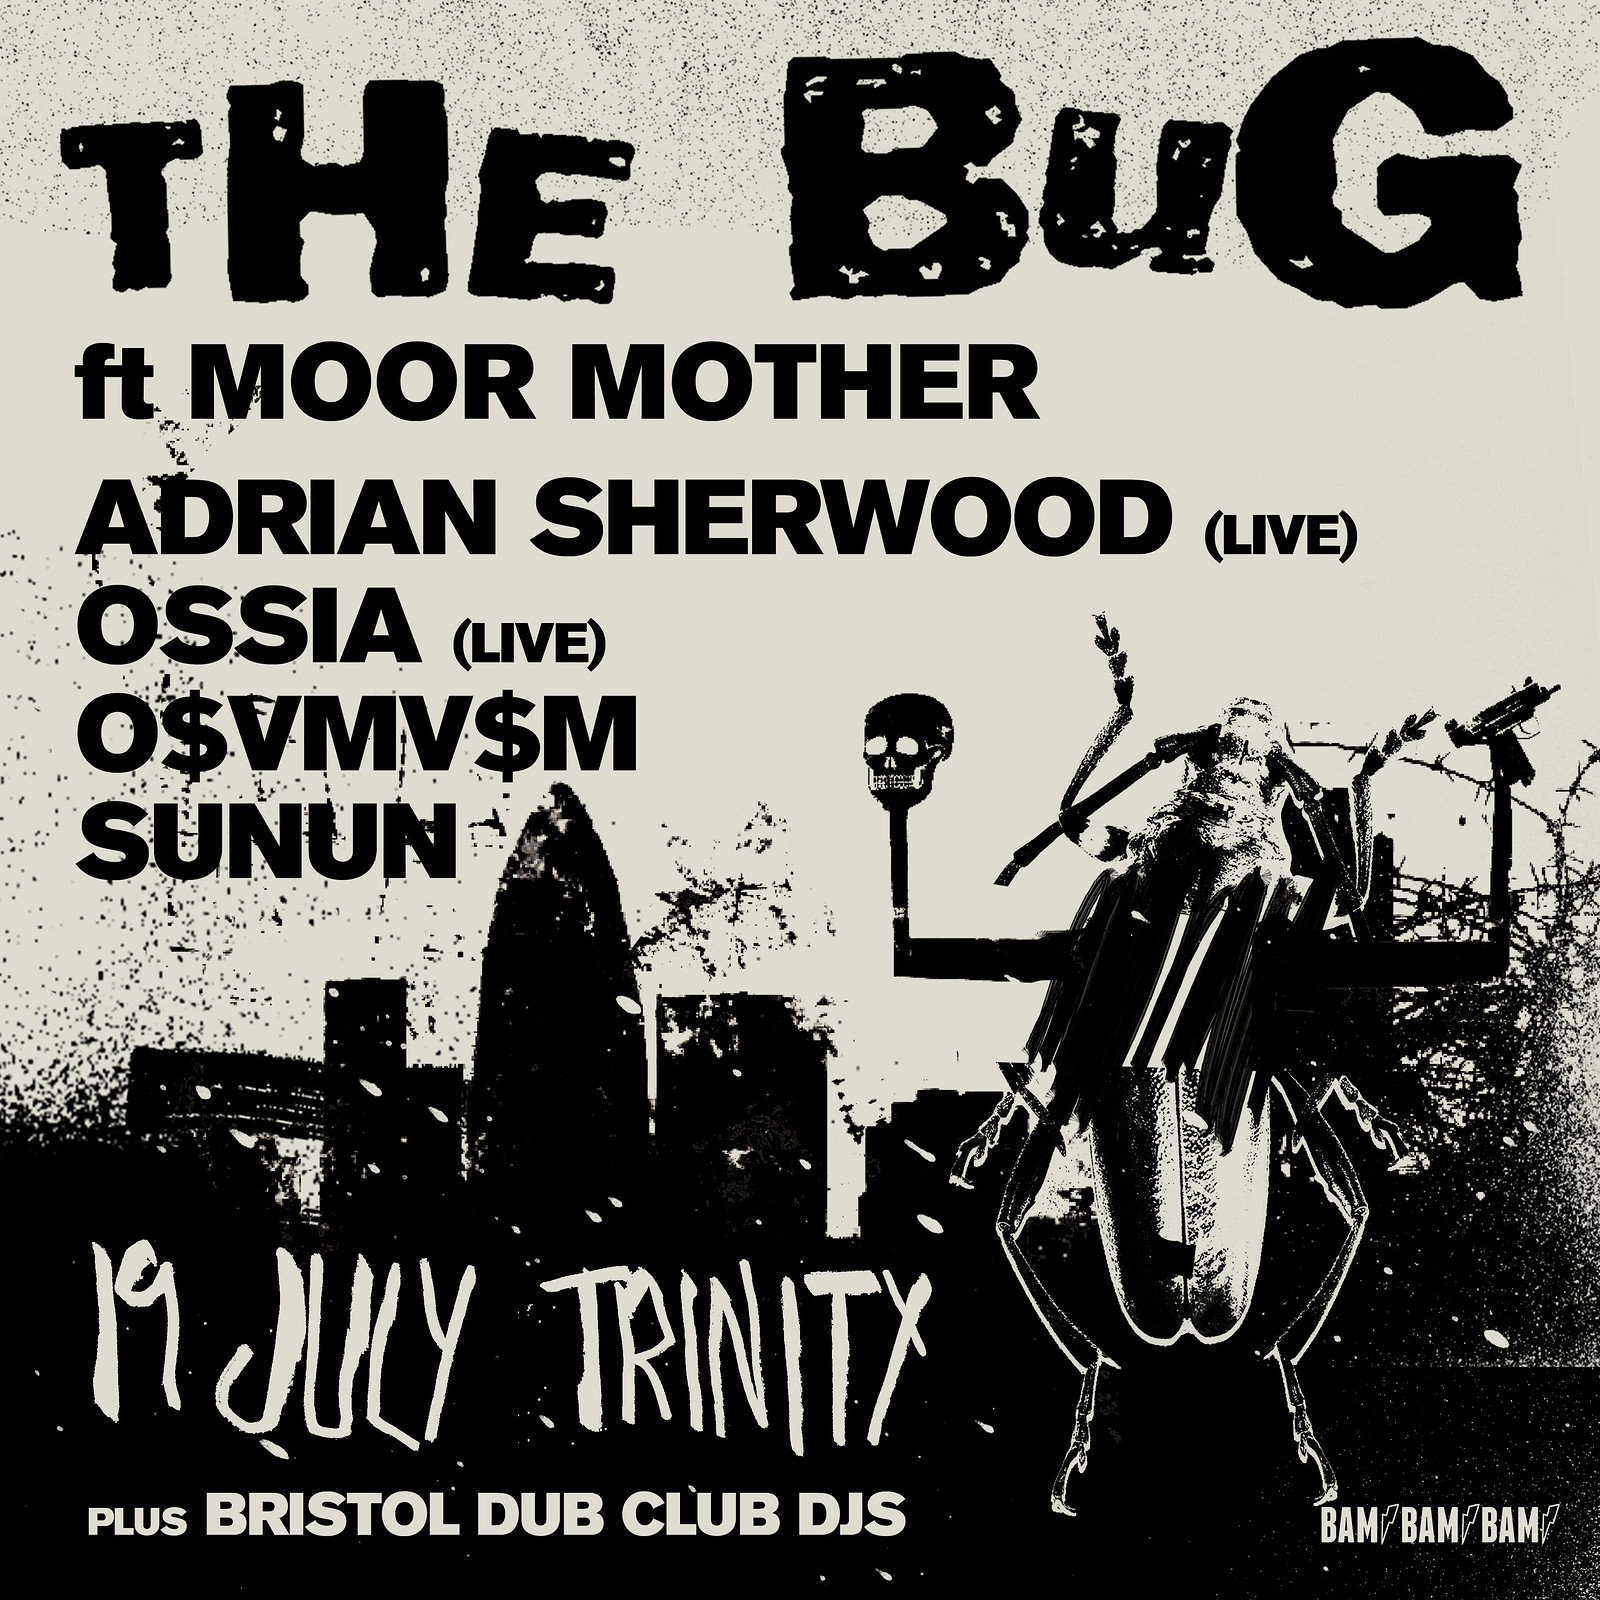 THE BUG w/ MOOR MOTHER - ADRIAN SHERWOOD AND SPECI at The Trinity Centre